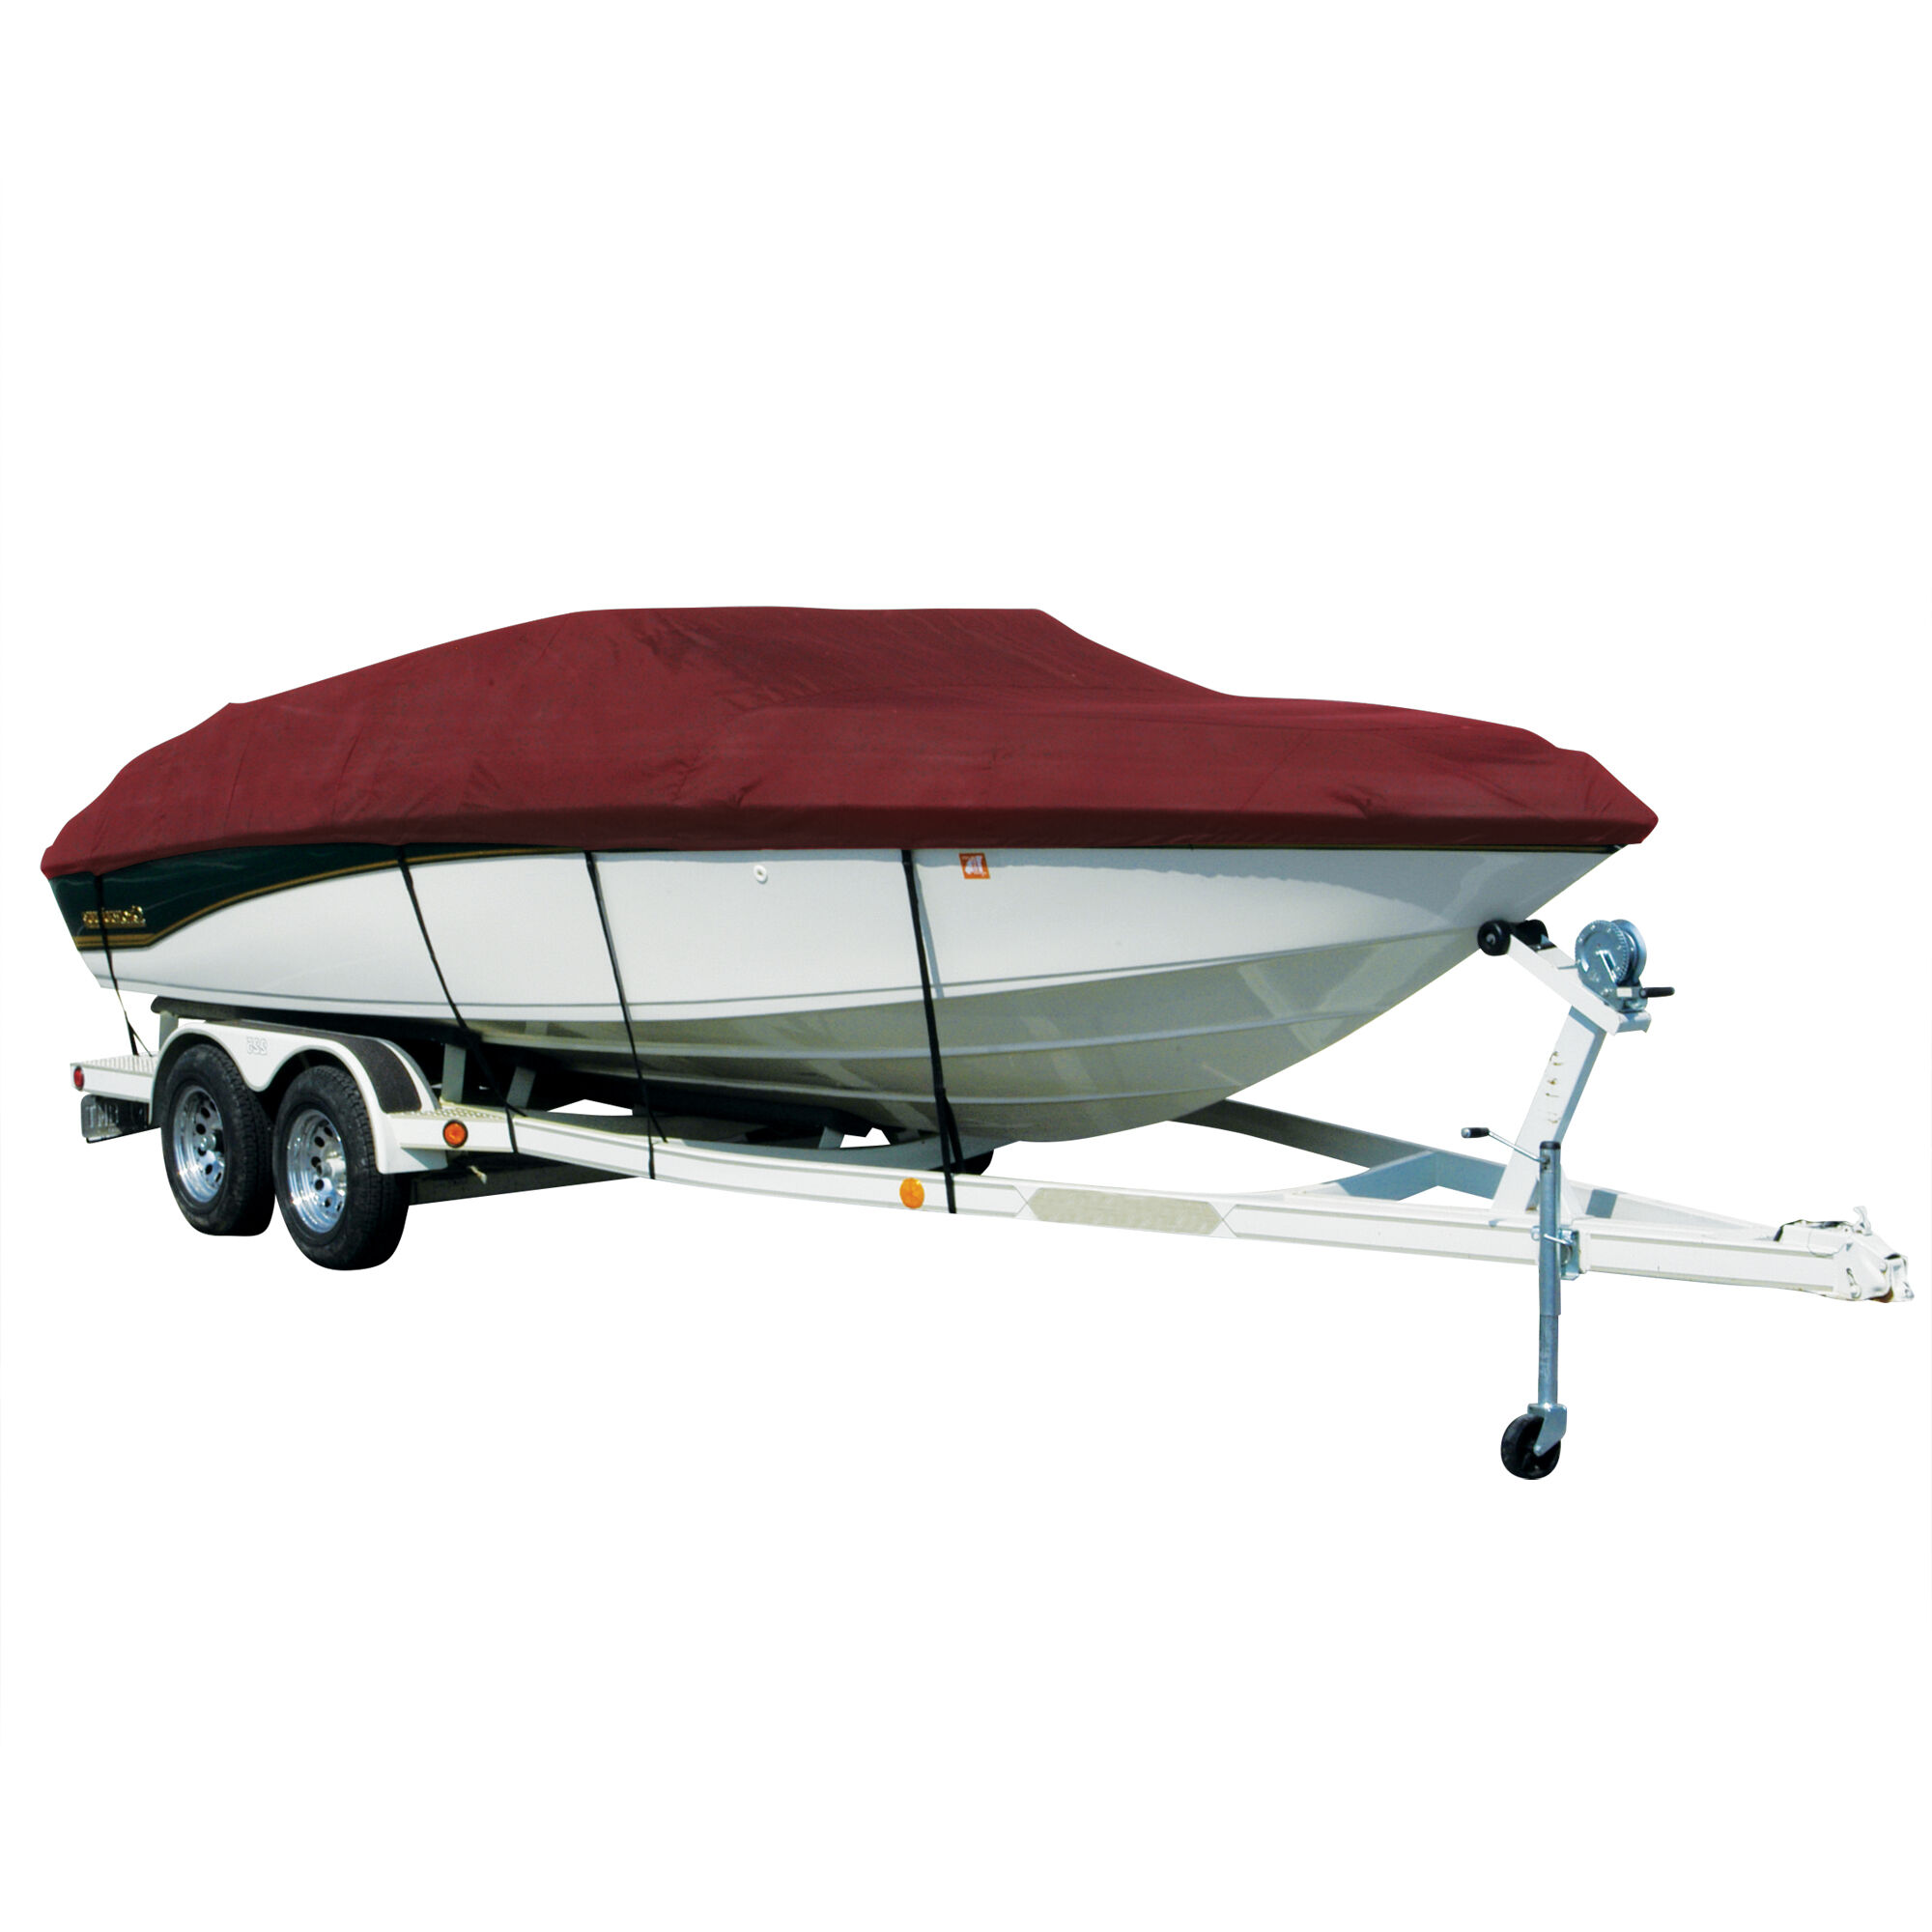 Covermate Exact Fit Sharkskin Boat Cover For Supreme 19 Cs Does Not Cover PLATFORMm in Burgundy